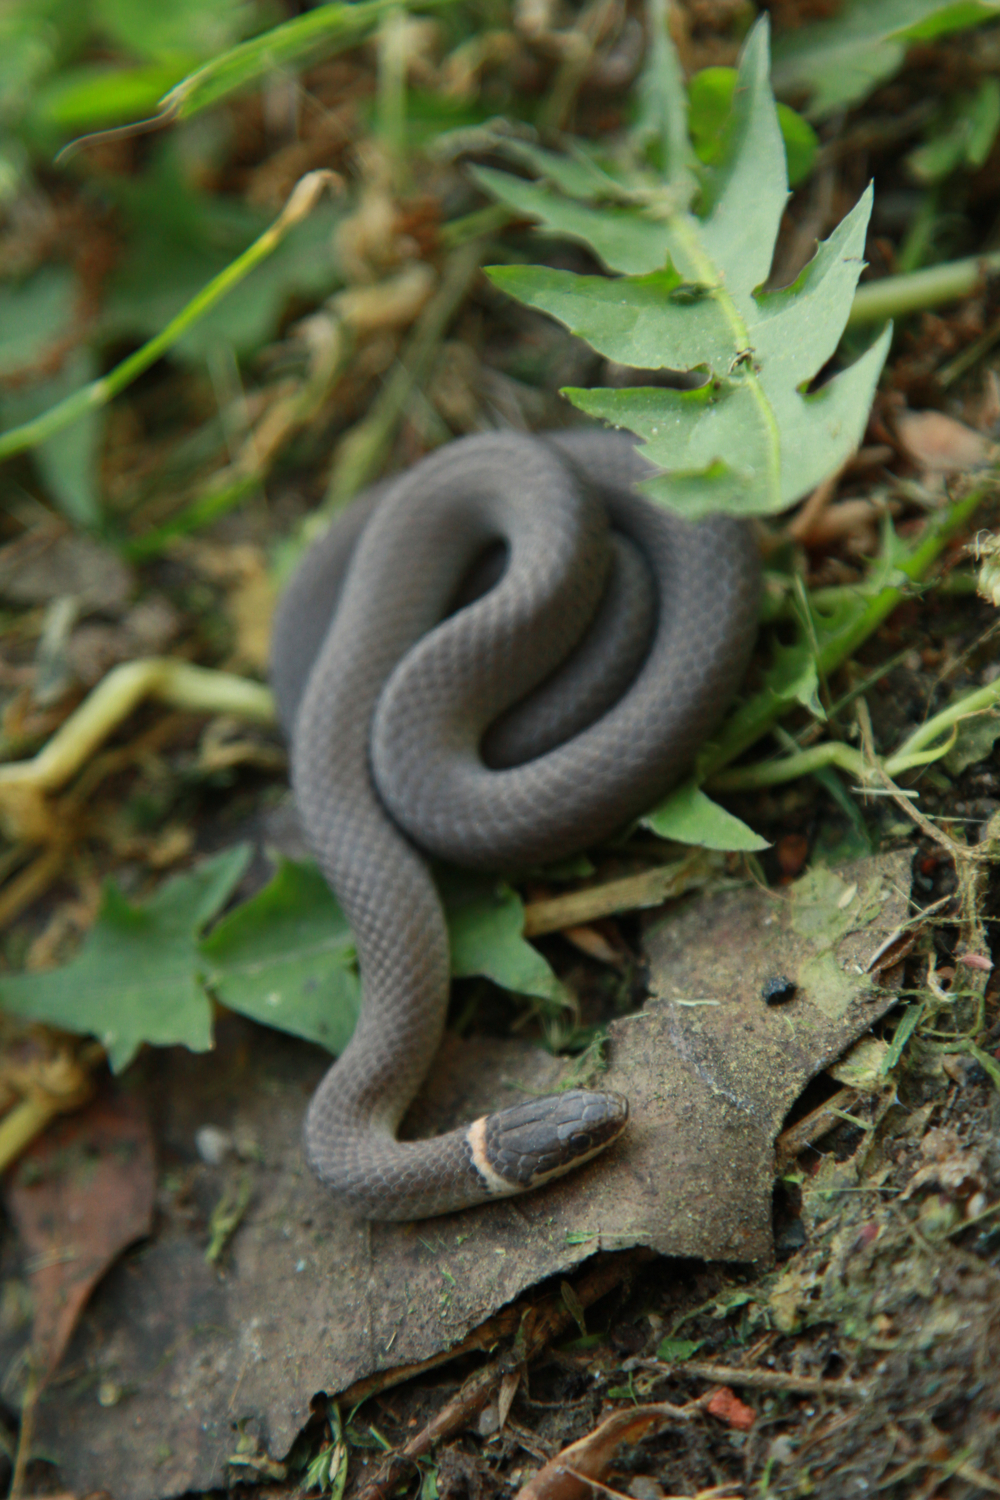 Facts about ringneck snakes